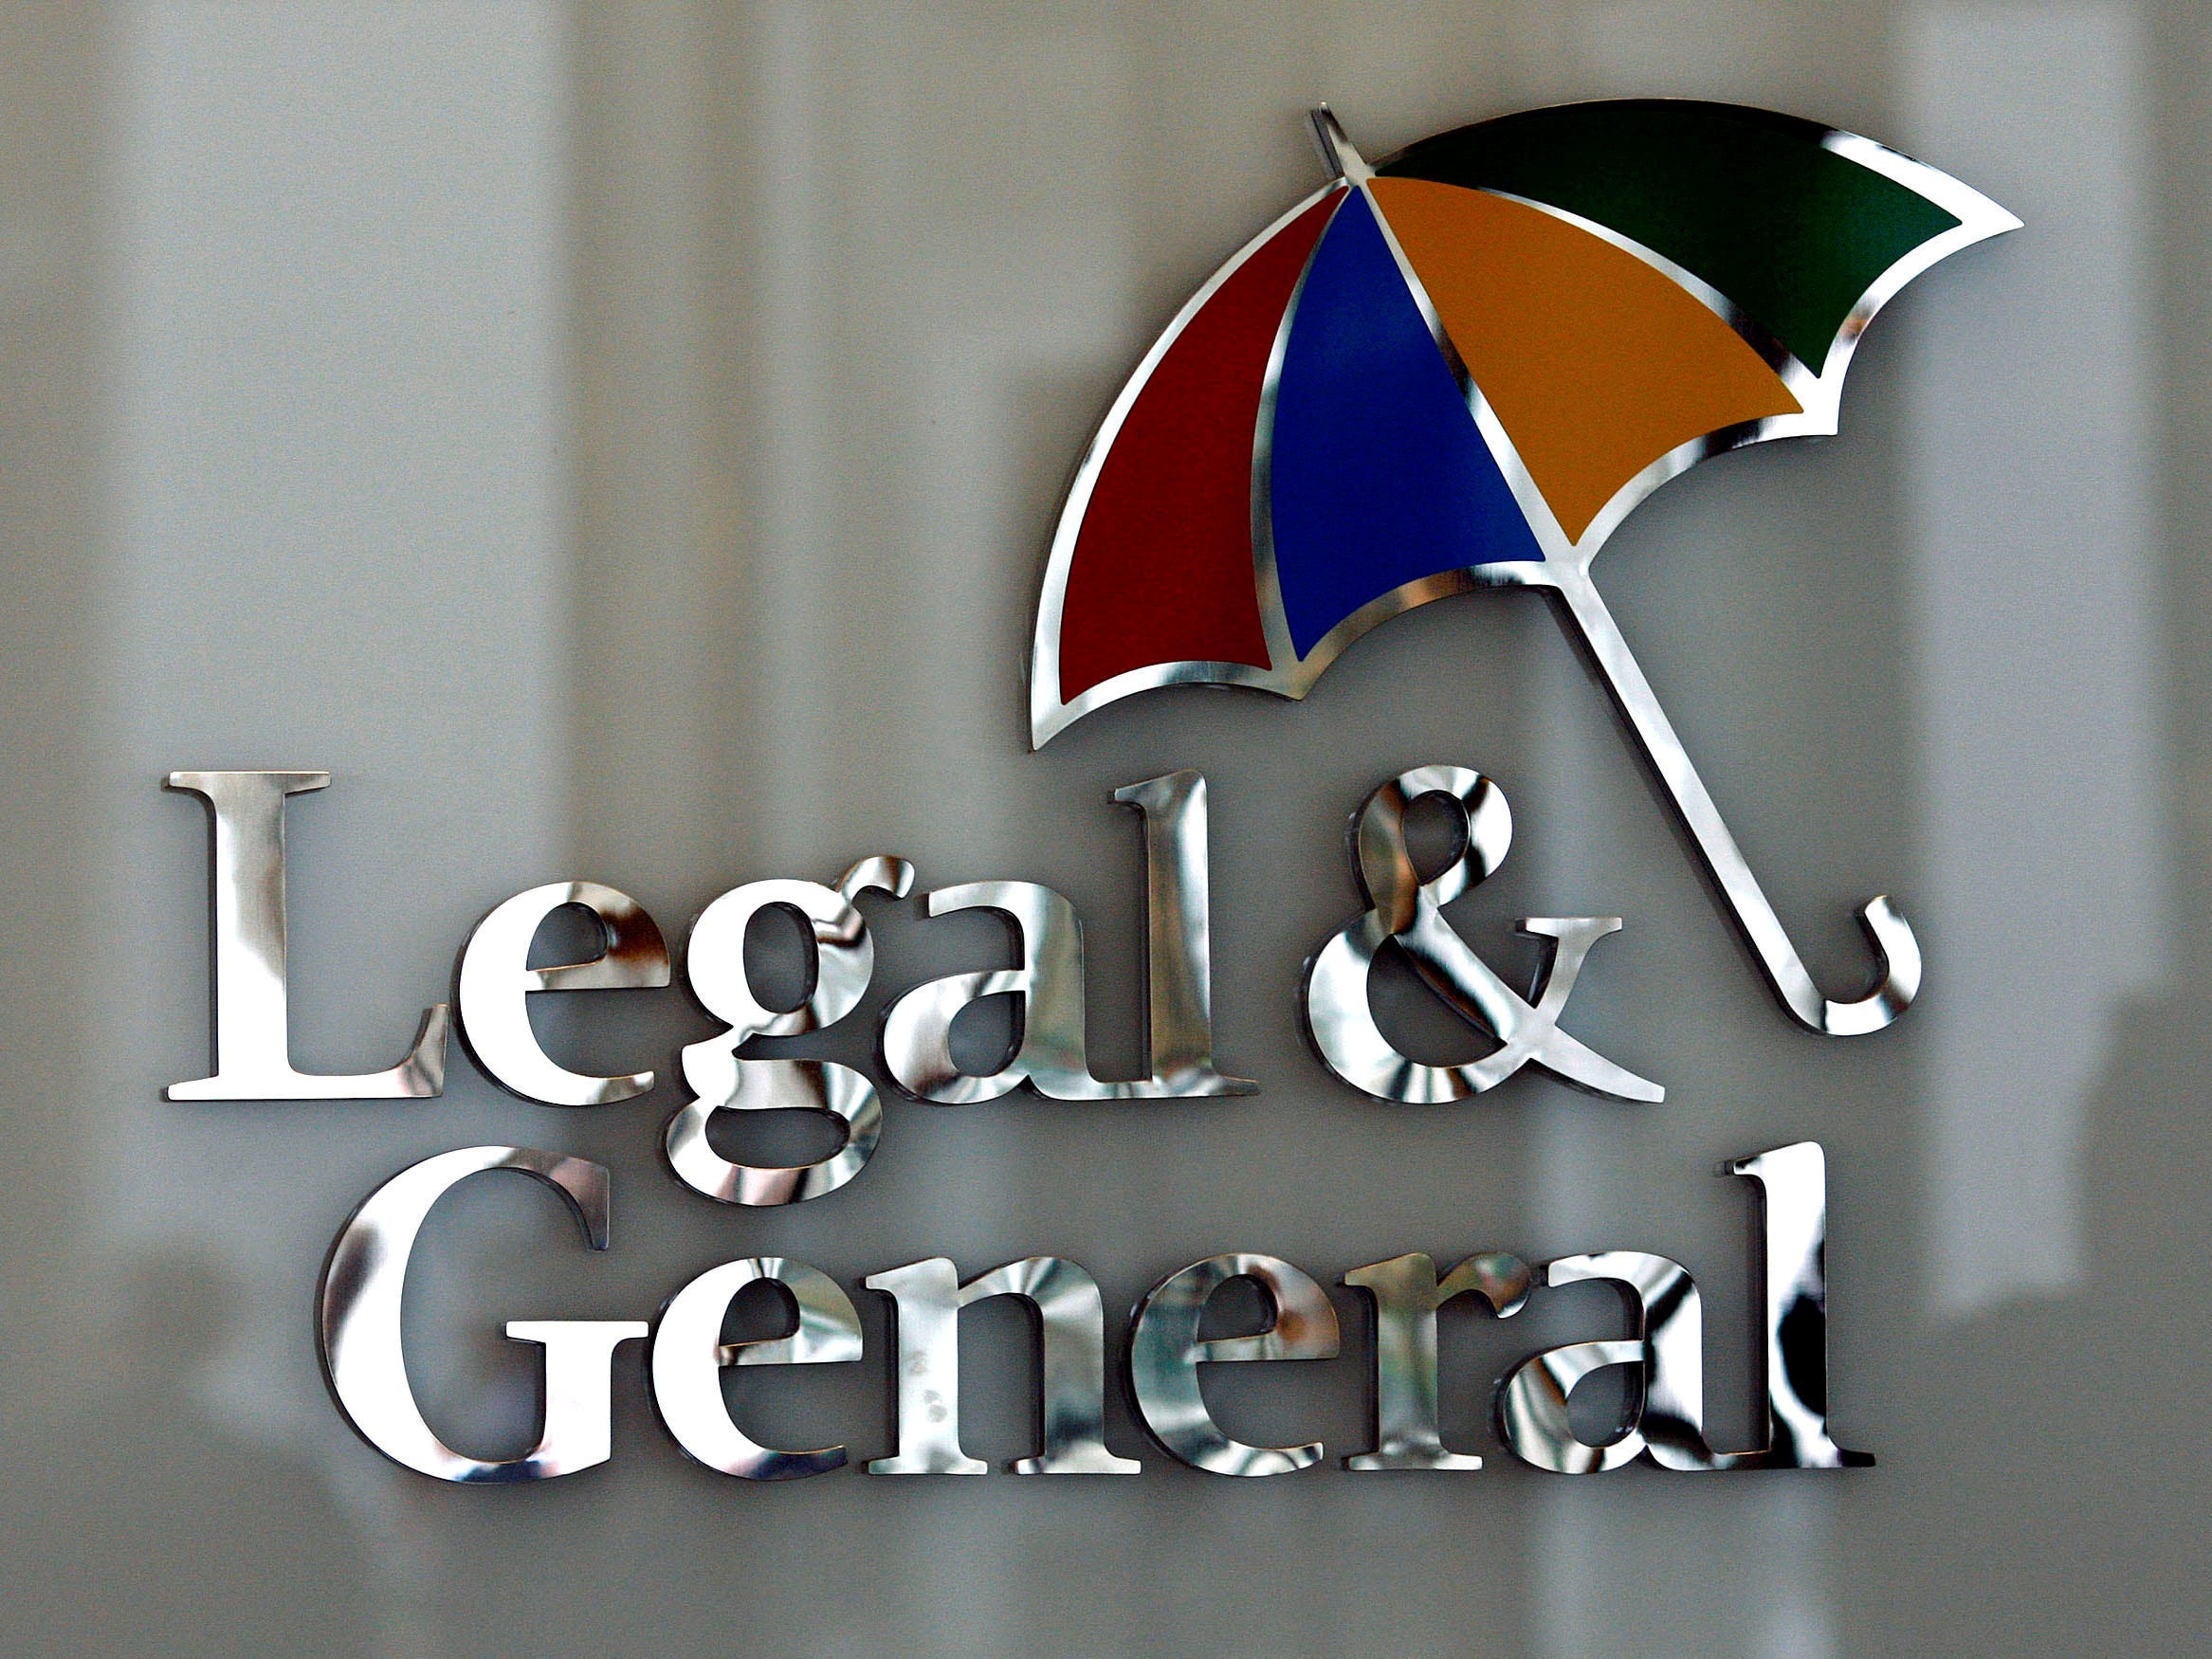 FILE PHOTO: The logo of Legal & General insurance company is seen at their office in central London, Britain, March 17, 2008. REUTERS/Alessia Pierdomenico/File Photo